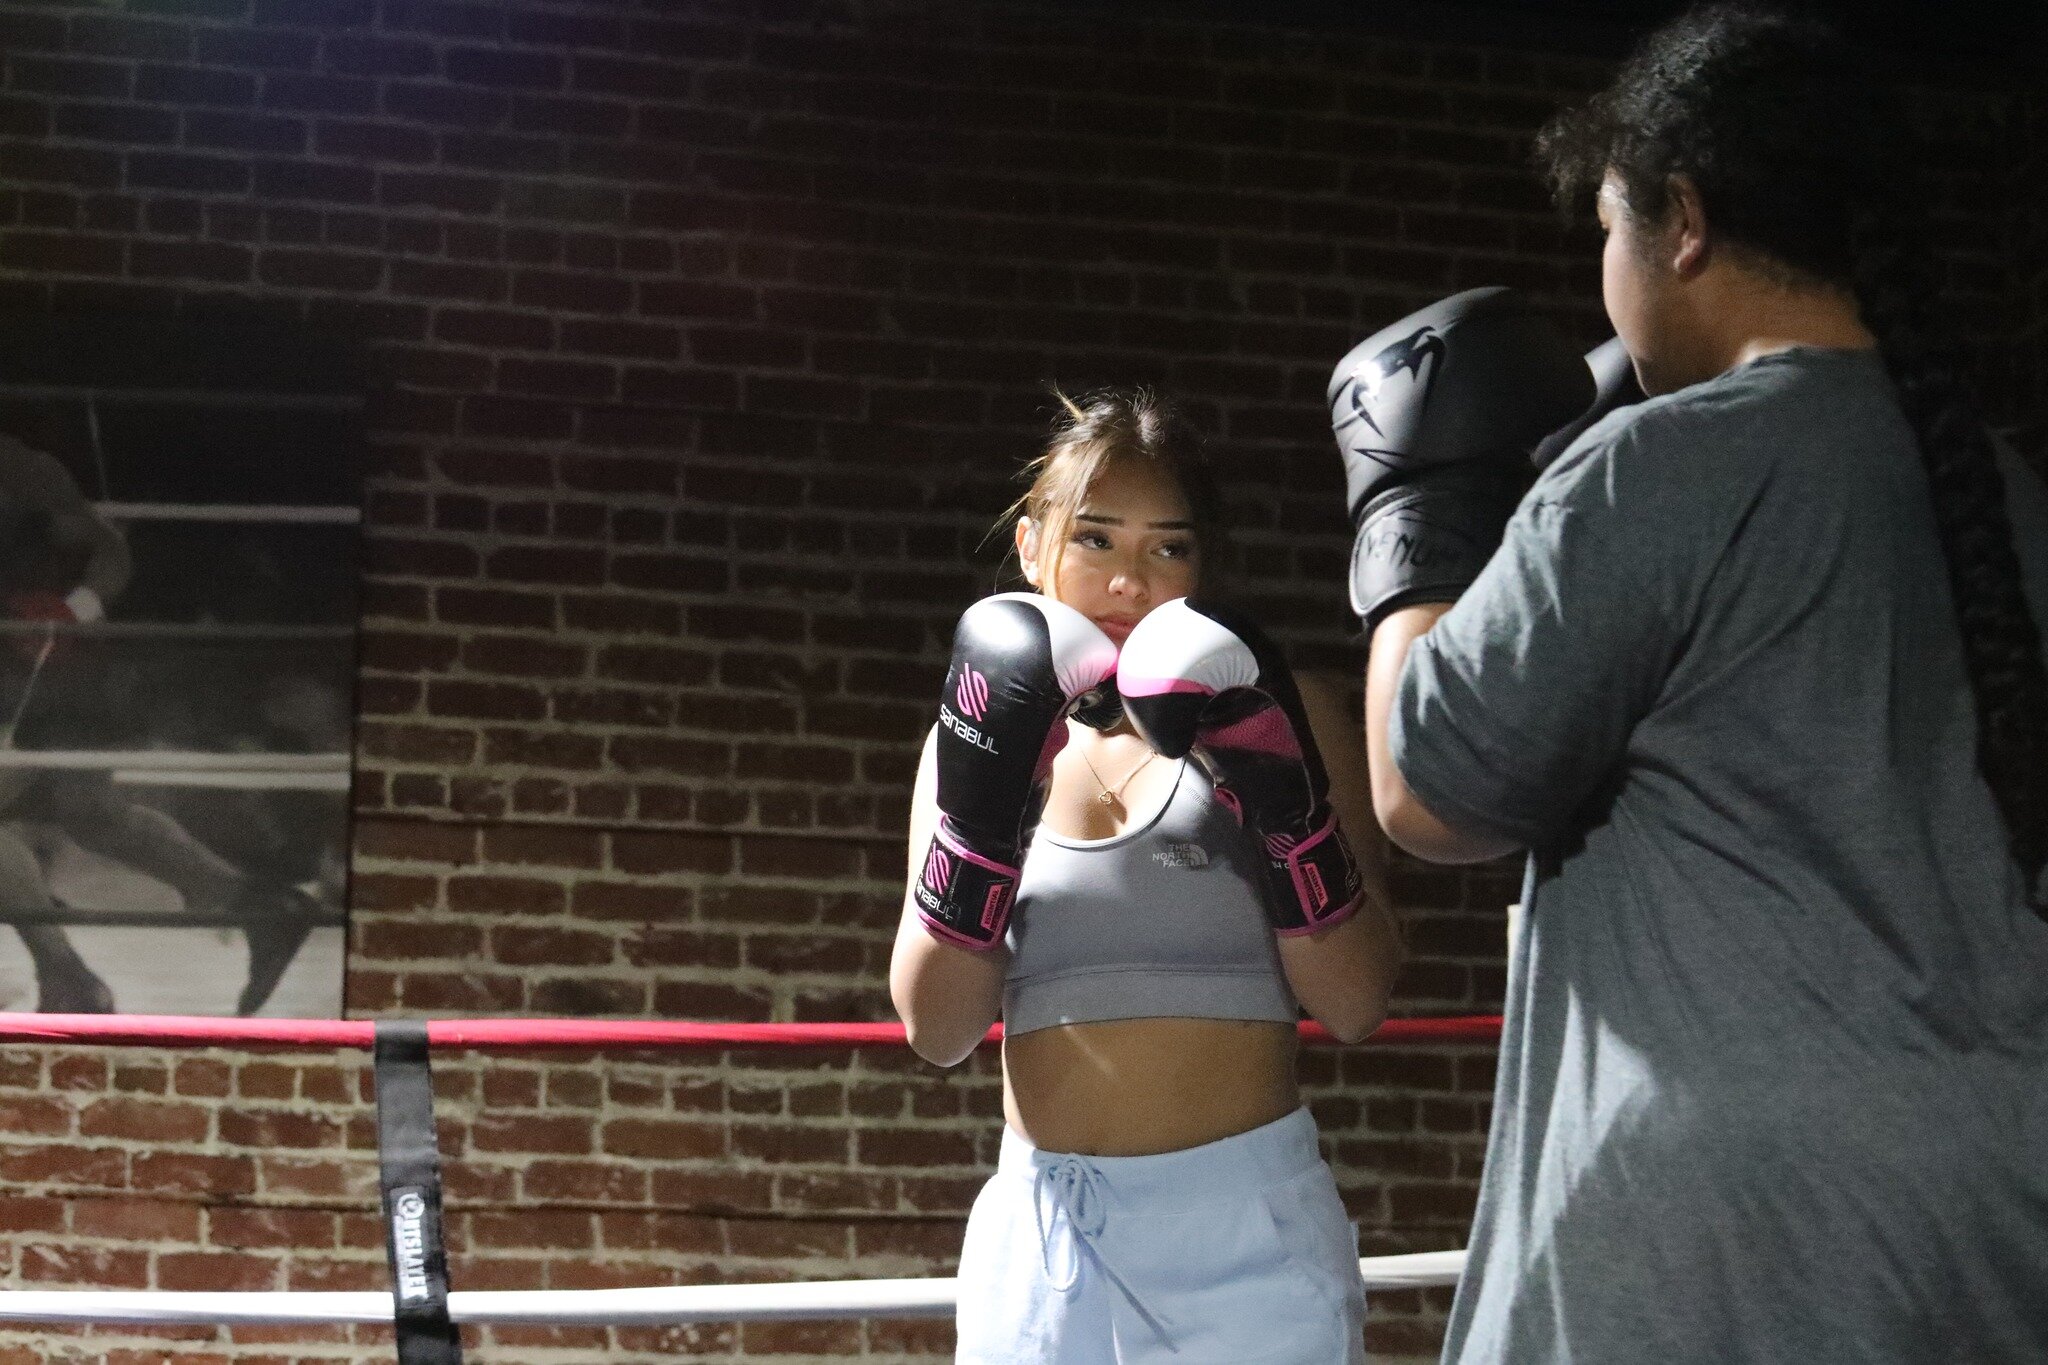 Hard work is worth it.

Contact us today, for a FREE Trial Class
688 E14 San Leandro, Ca.
📩: theteam@kennelboxing.com

#boxing #boxeo #box #boxinglife #training #gym #workout #fighter #champion #knockout #fighting #fitness #fitnessmotivation #selfde